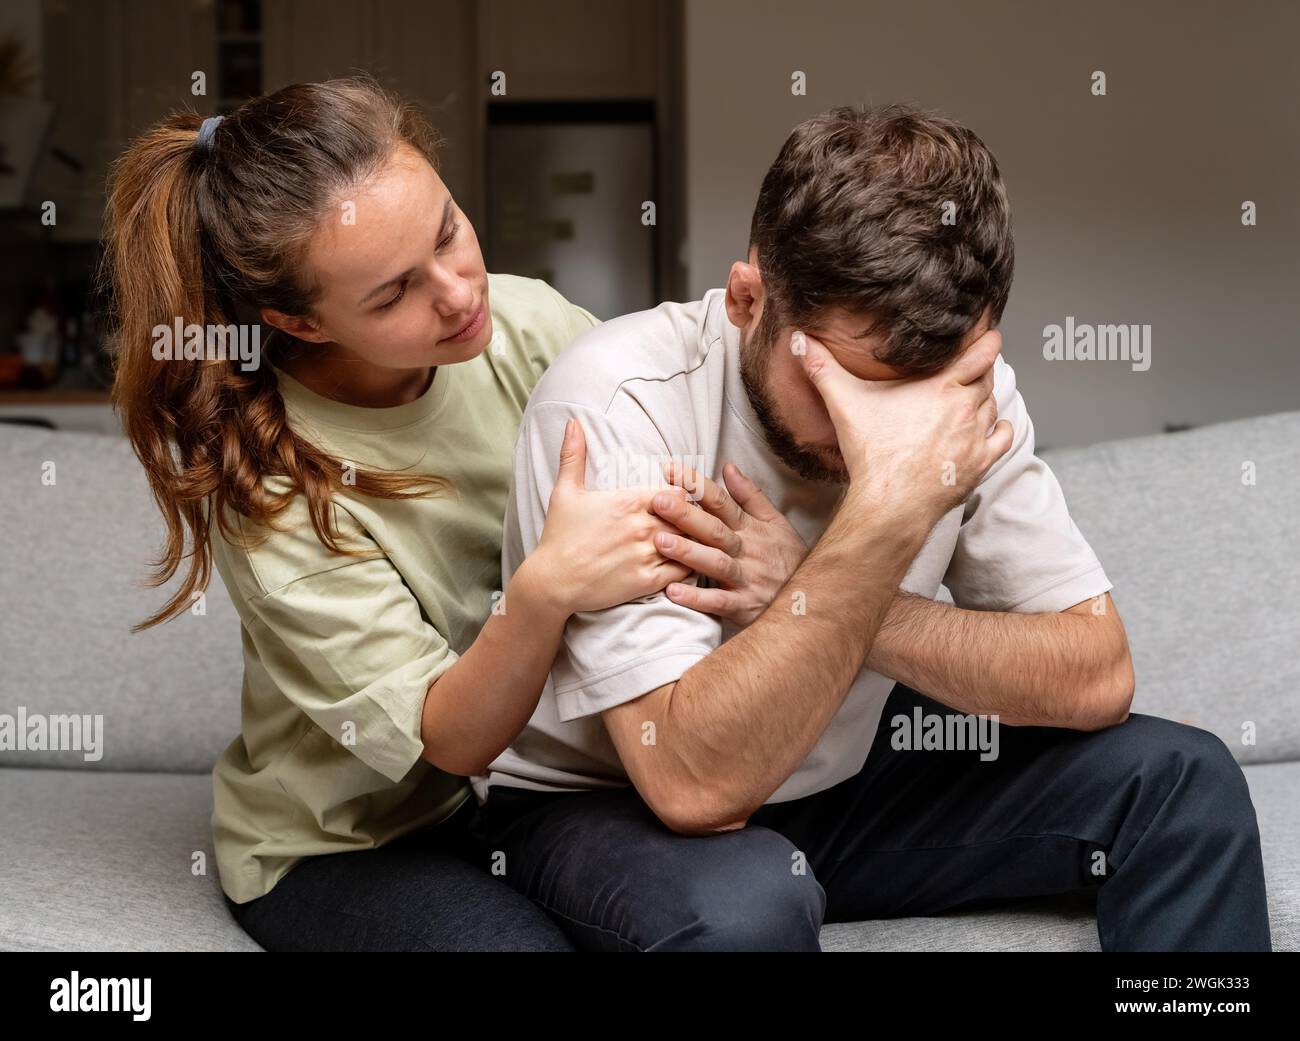 Relationship difficulties. Midlife crisis in men. Disappointed man and his wife at home. Mental illness. Stock Photo